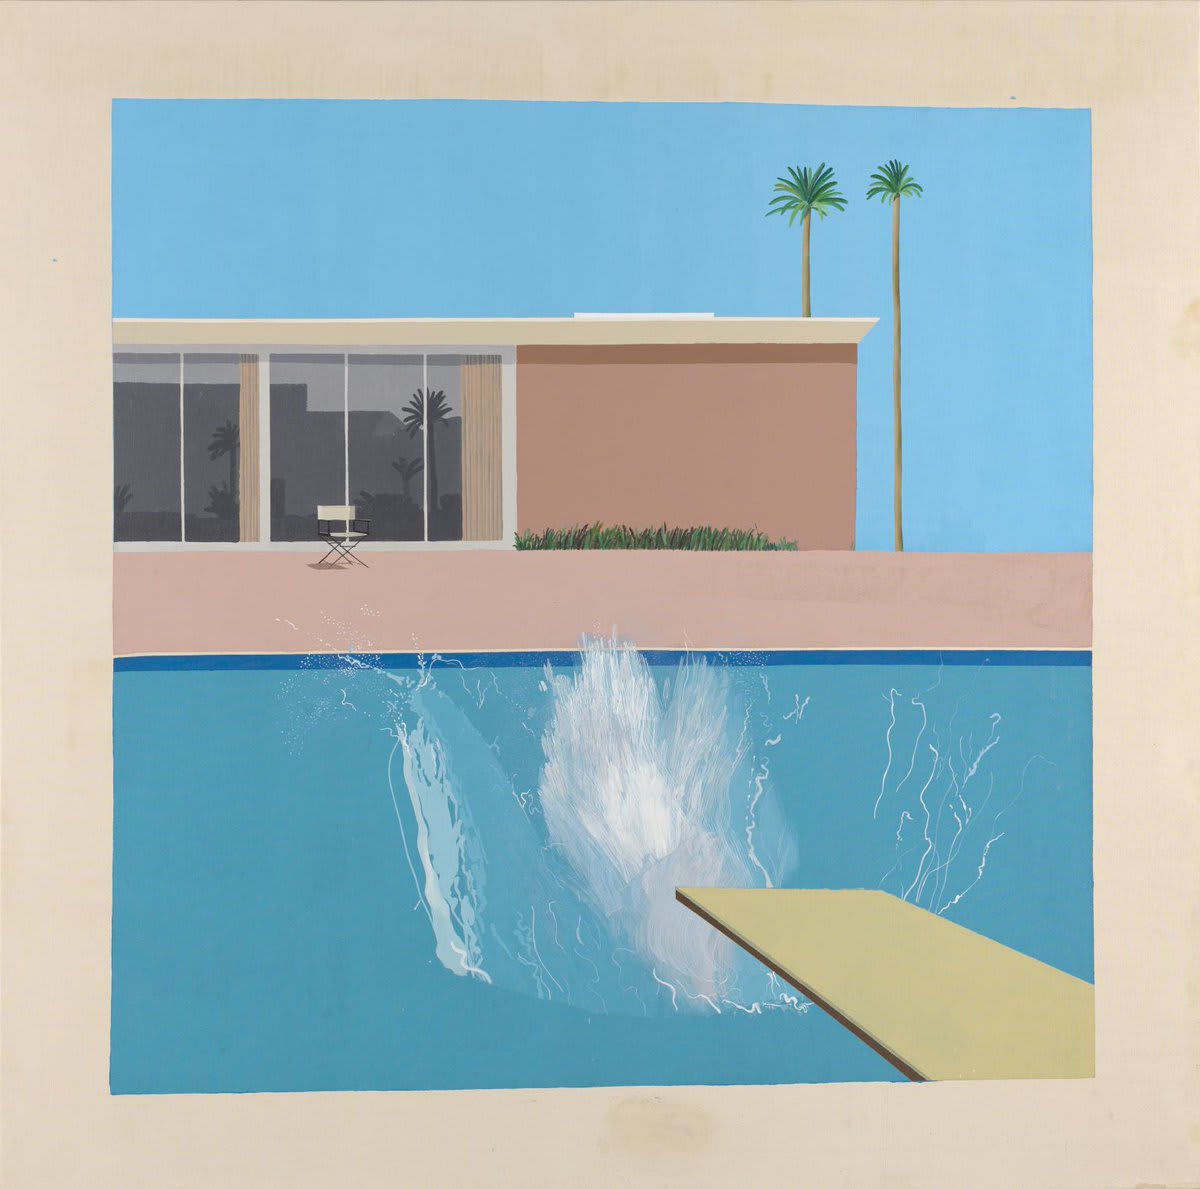 Happy birthday Hockney! 💦 'A Bigger Splash' took DavidHockney two weeks to paint, in contrast to the fleeting moment it captures. The painting imbues a sense of joy & feelings of optimism for those who see it—find it on free display at Tate Britain.